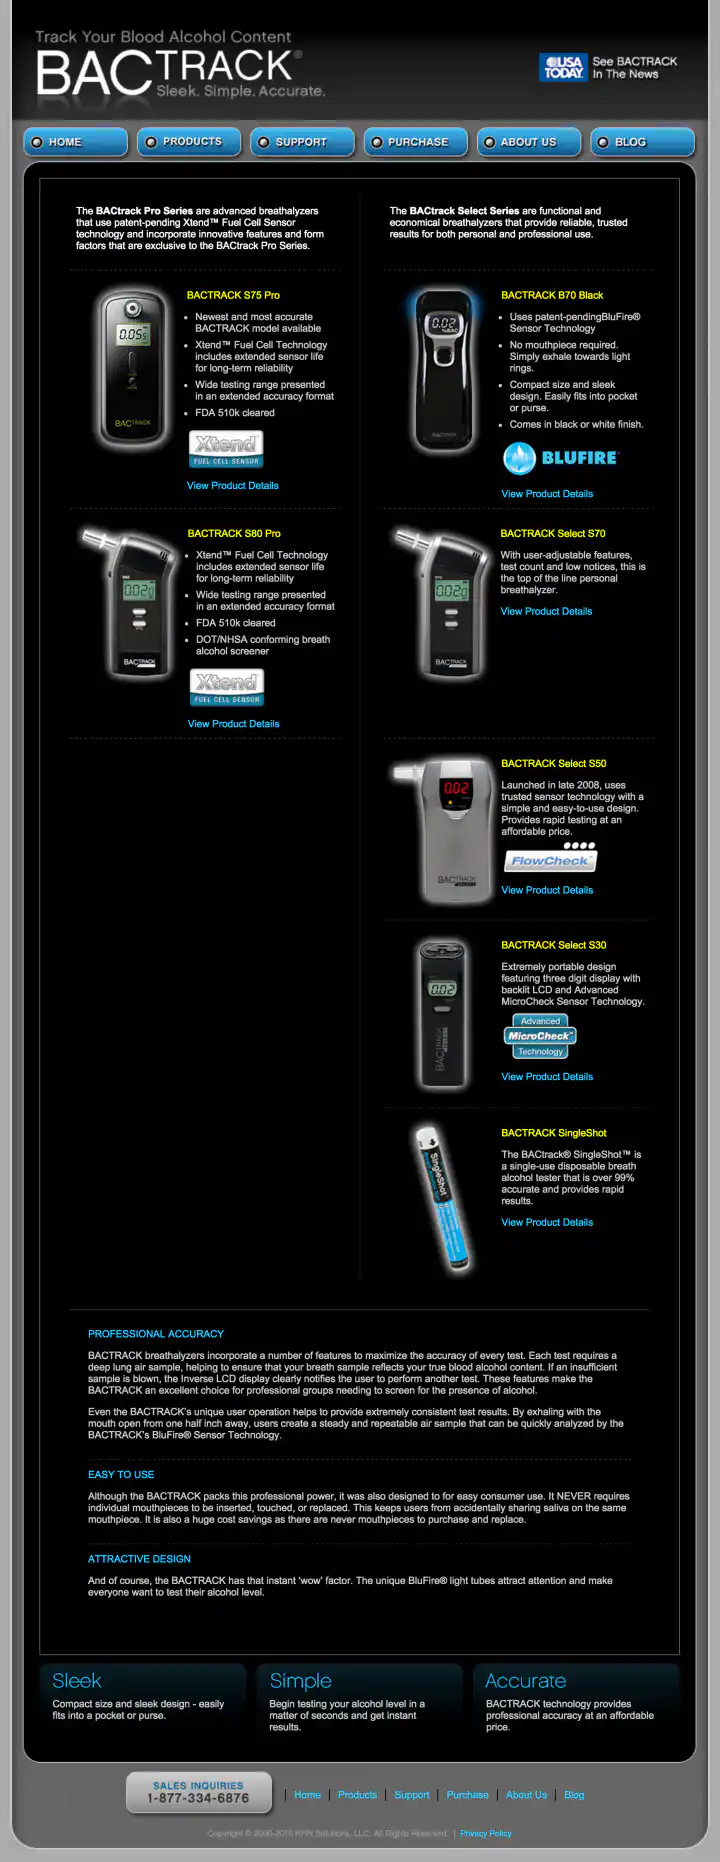 BACtrack Breathalyzers Products Page